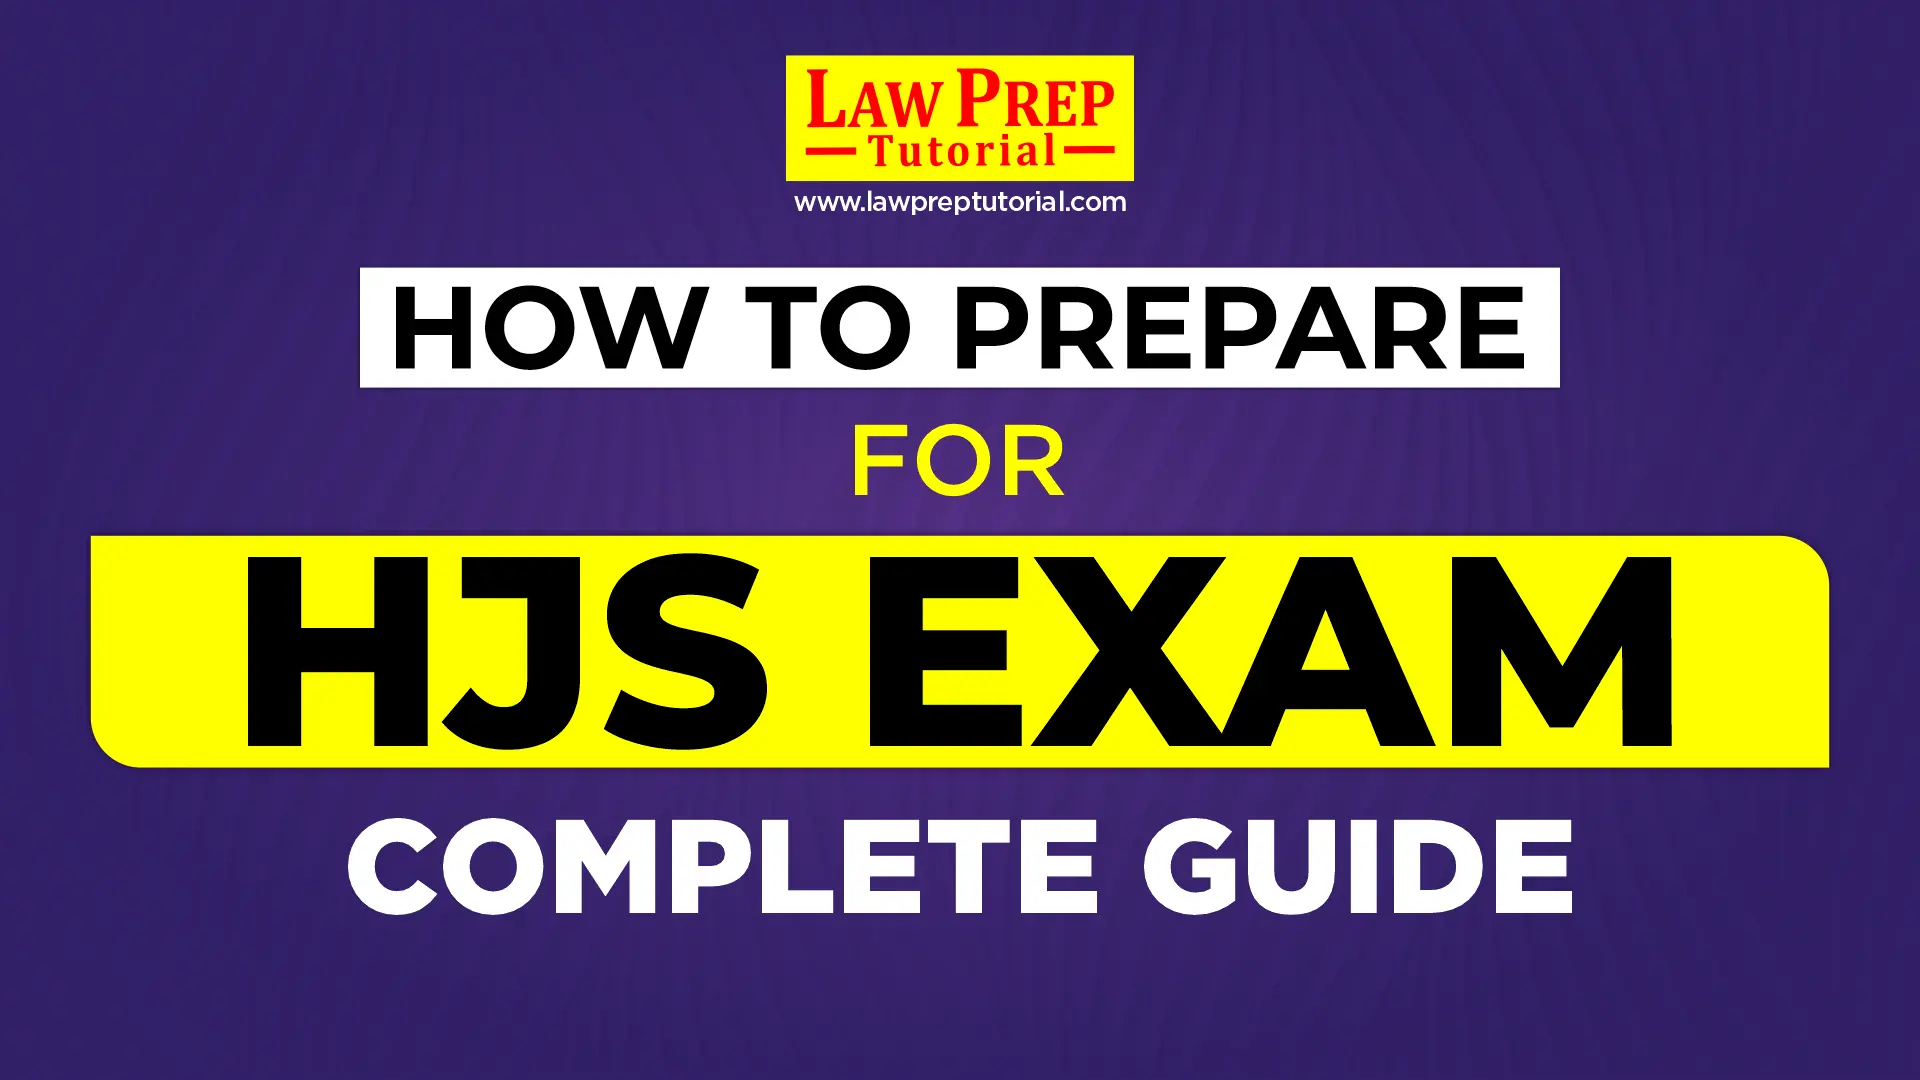 How To Prepare For HJS Exam